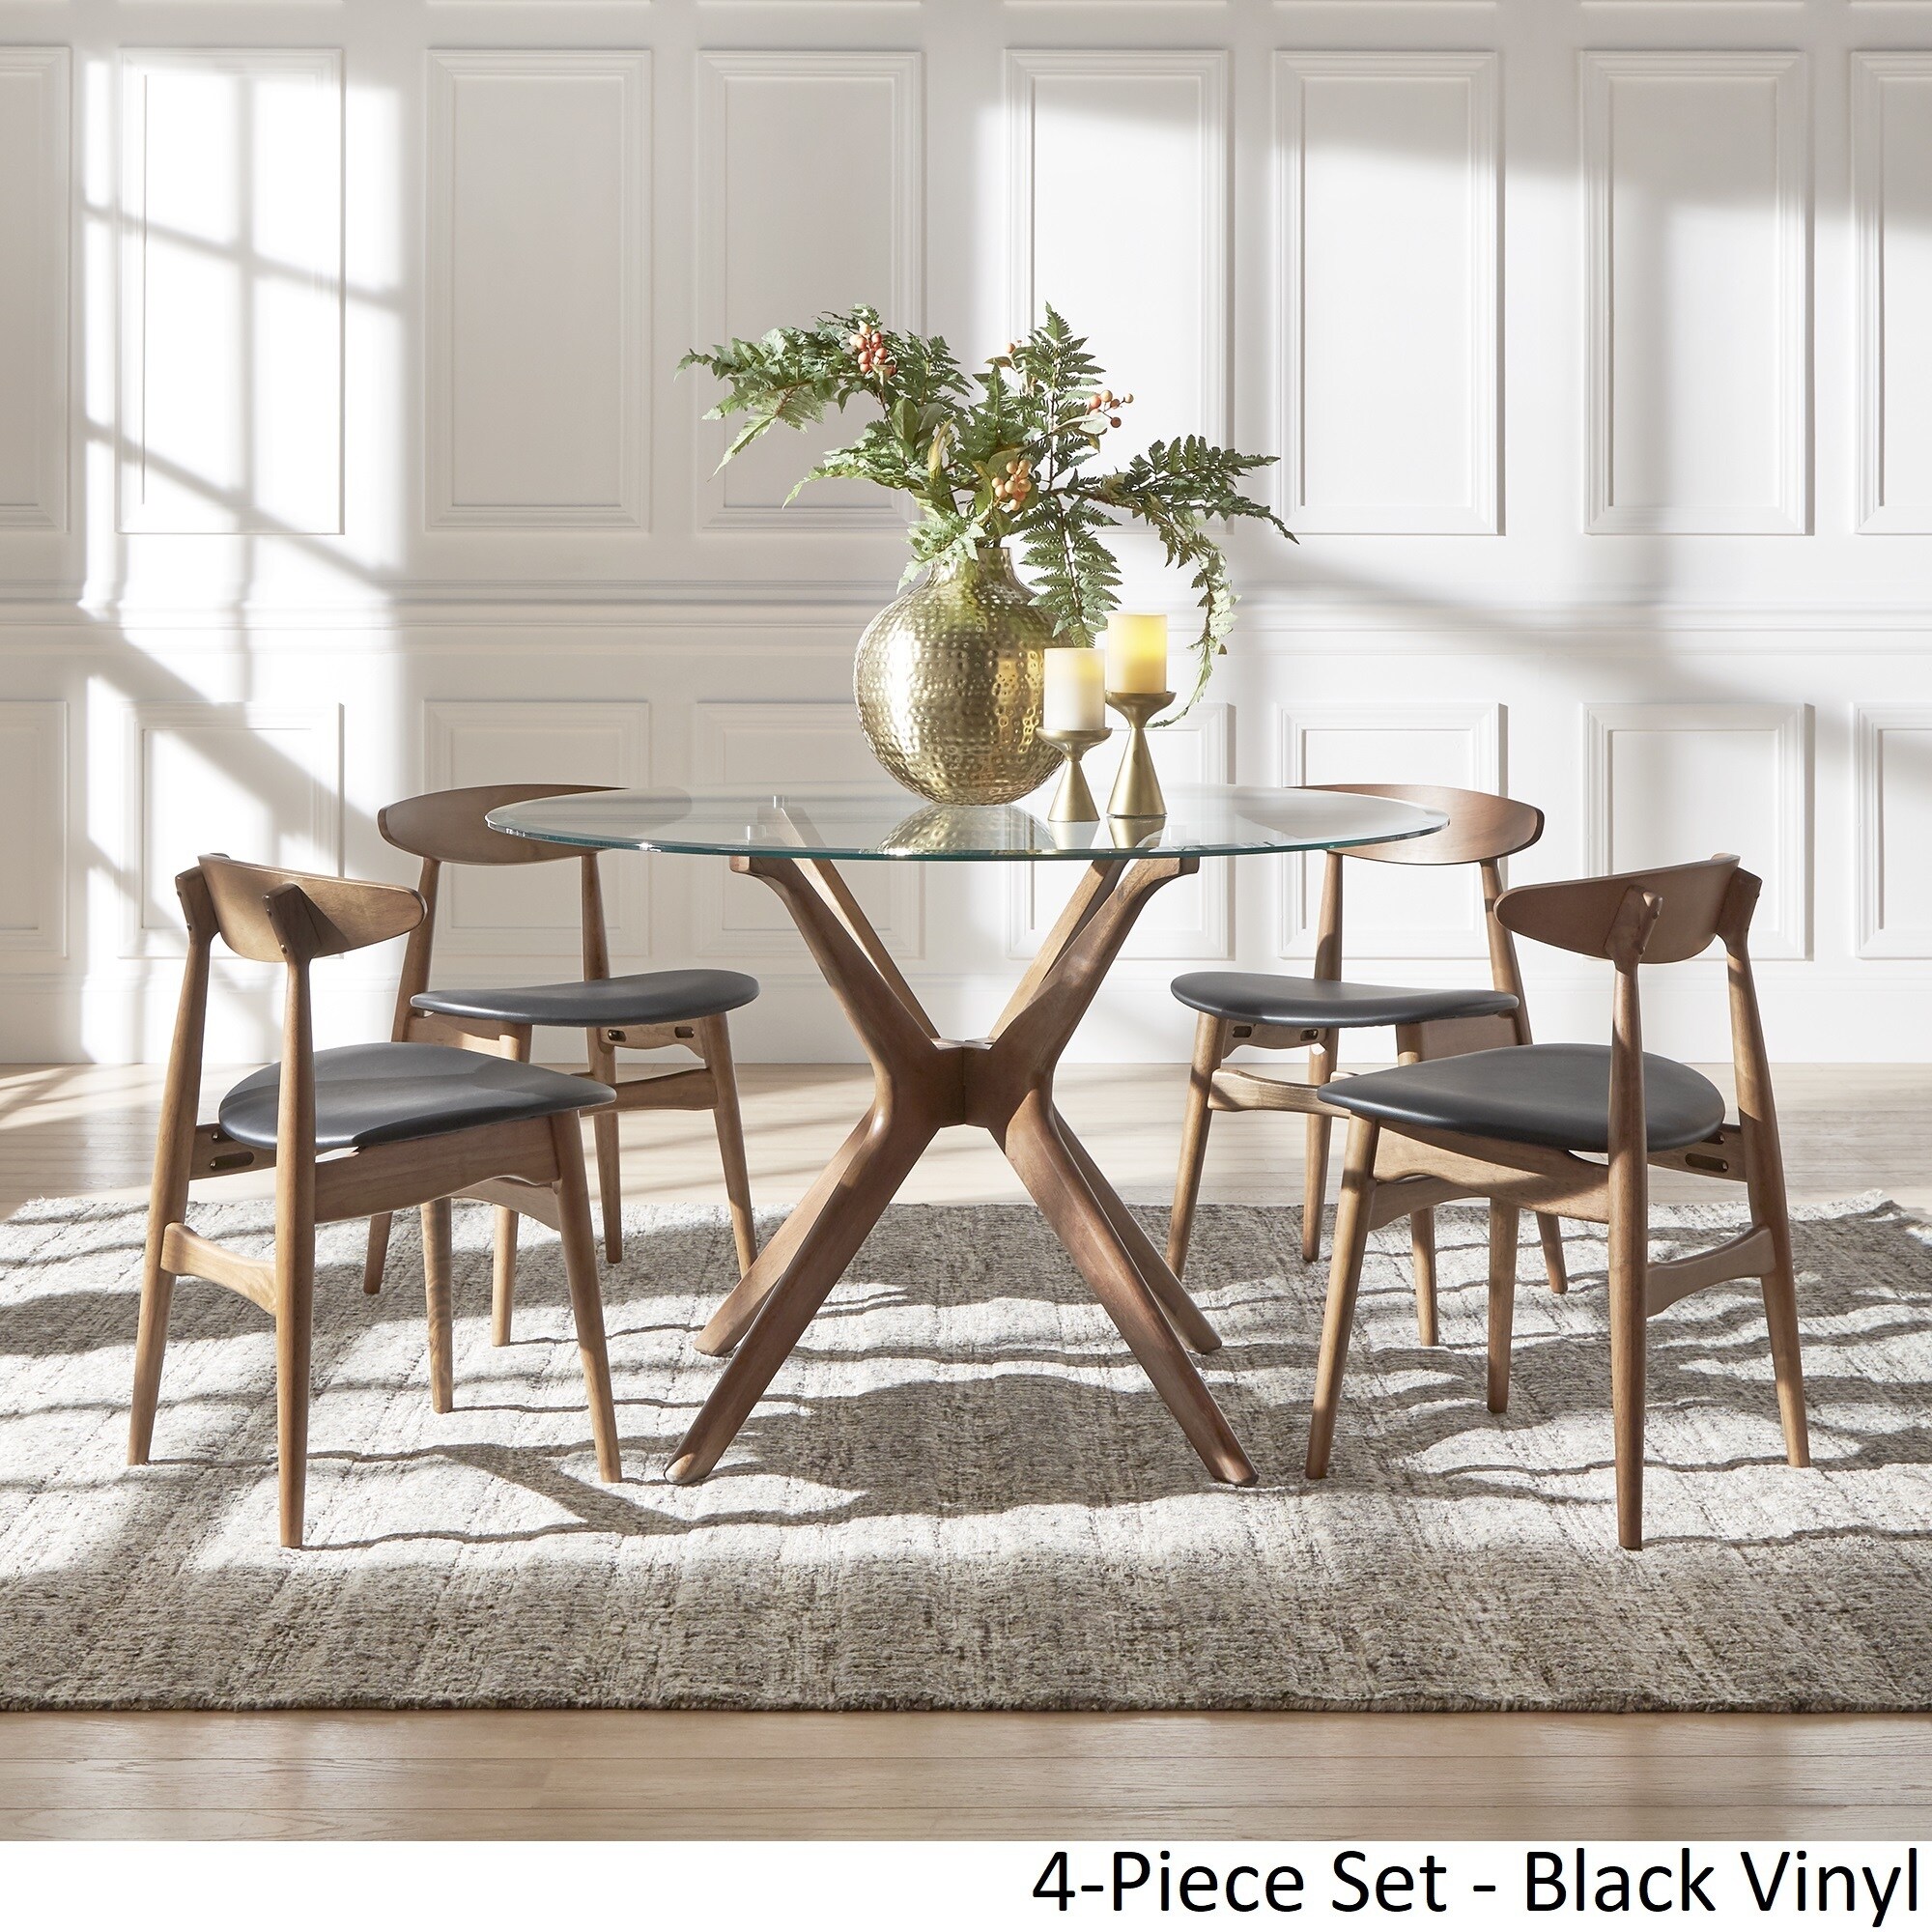 https://ak1.ostkcdn.com/images/products/18218122/Nadine-Walnut-Finish-Glass-Table-Top-Round-Dining-Set-Curved-Back-Chairs-by-iNSPIRE-Q-Modern-239fd51b-4225-44c3-adef-9140509b5d2b.jpg